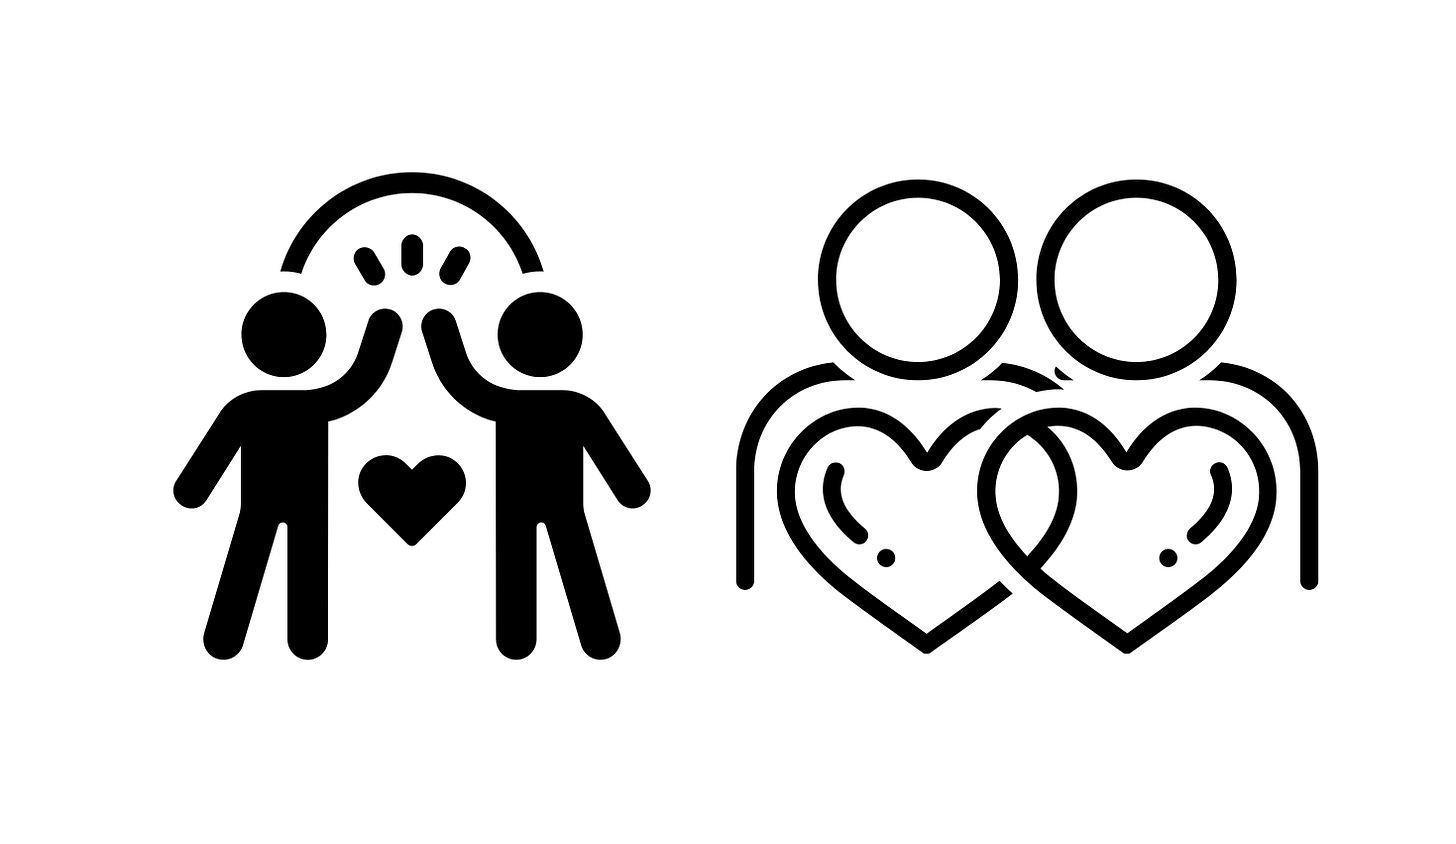 Black line side by side graphics of two people high fiving and two people with hearts on their torsos.